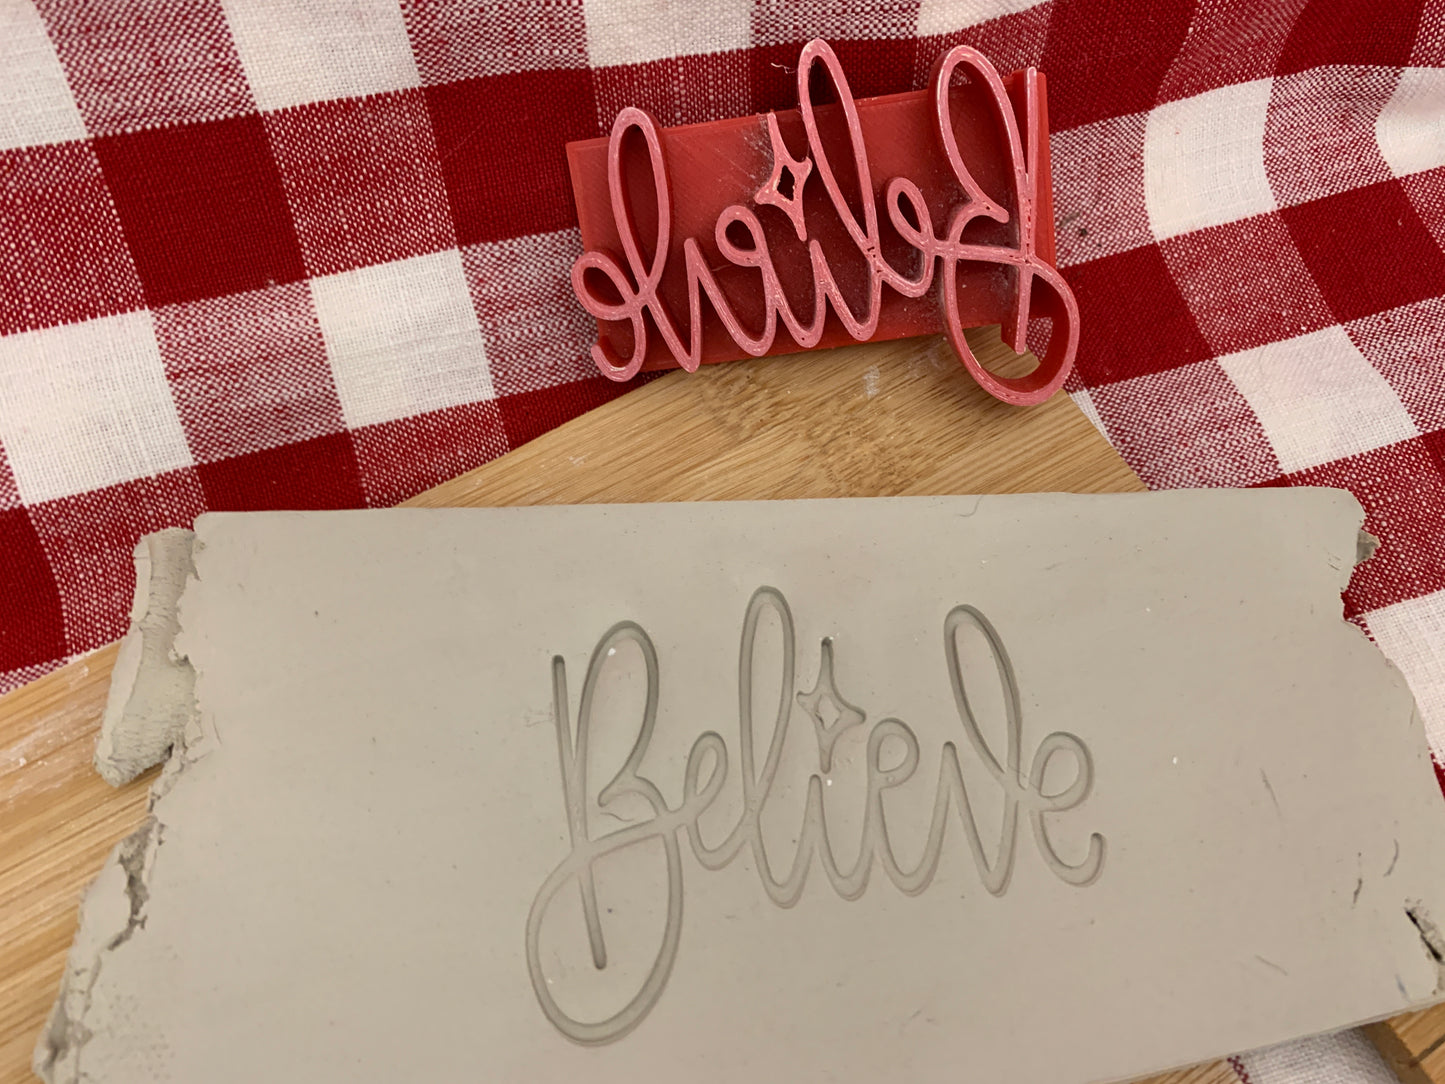 Christmas casual "Believe" word stamp - plastic 3D printed, multiple sizes